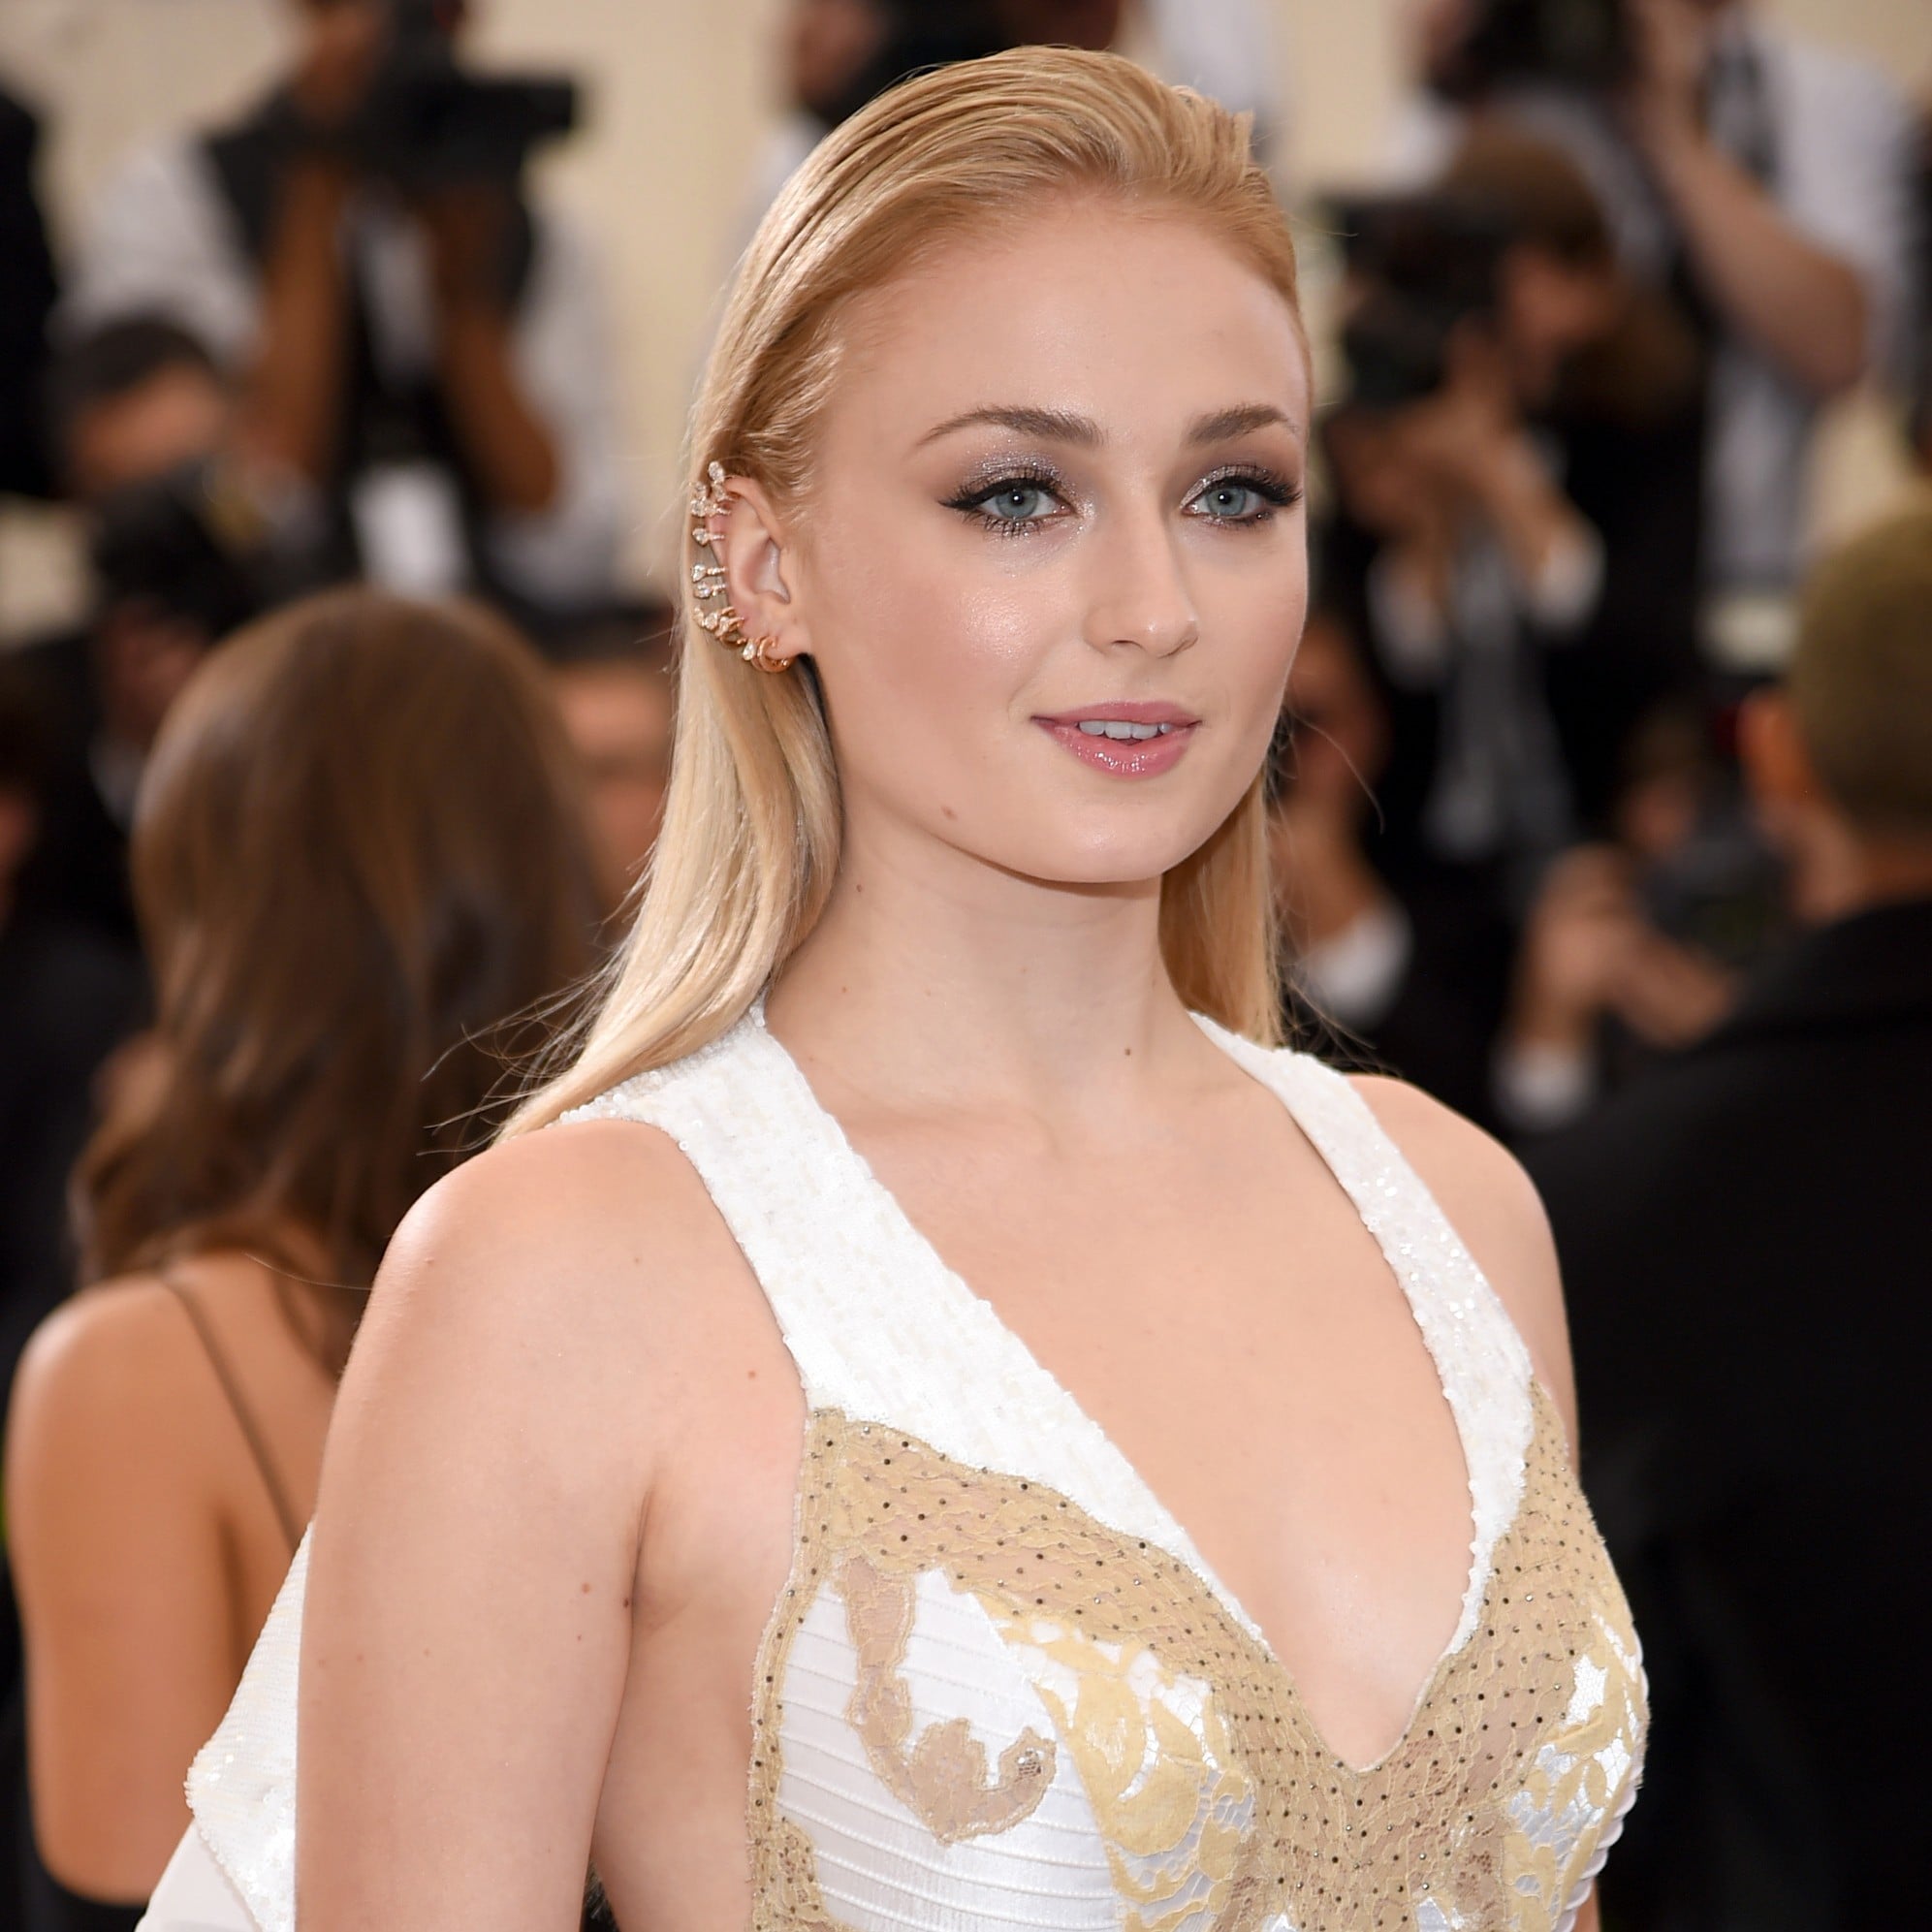 Sophie Turner Louis Vuitton Fashion Show March 7, 2017 – Star Style